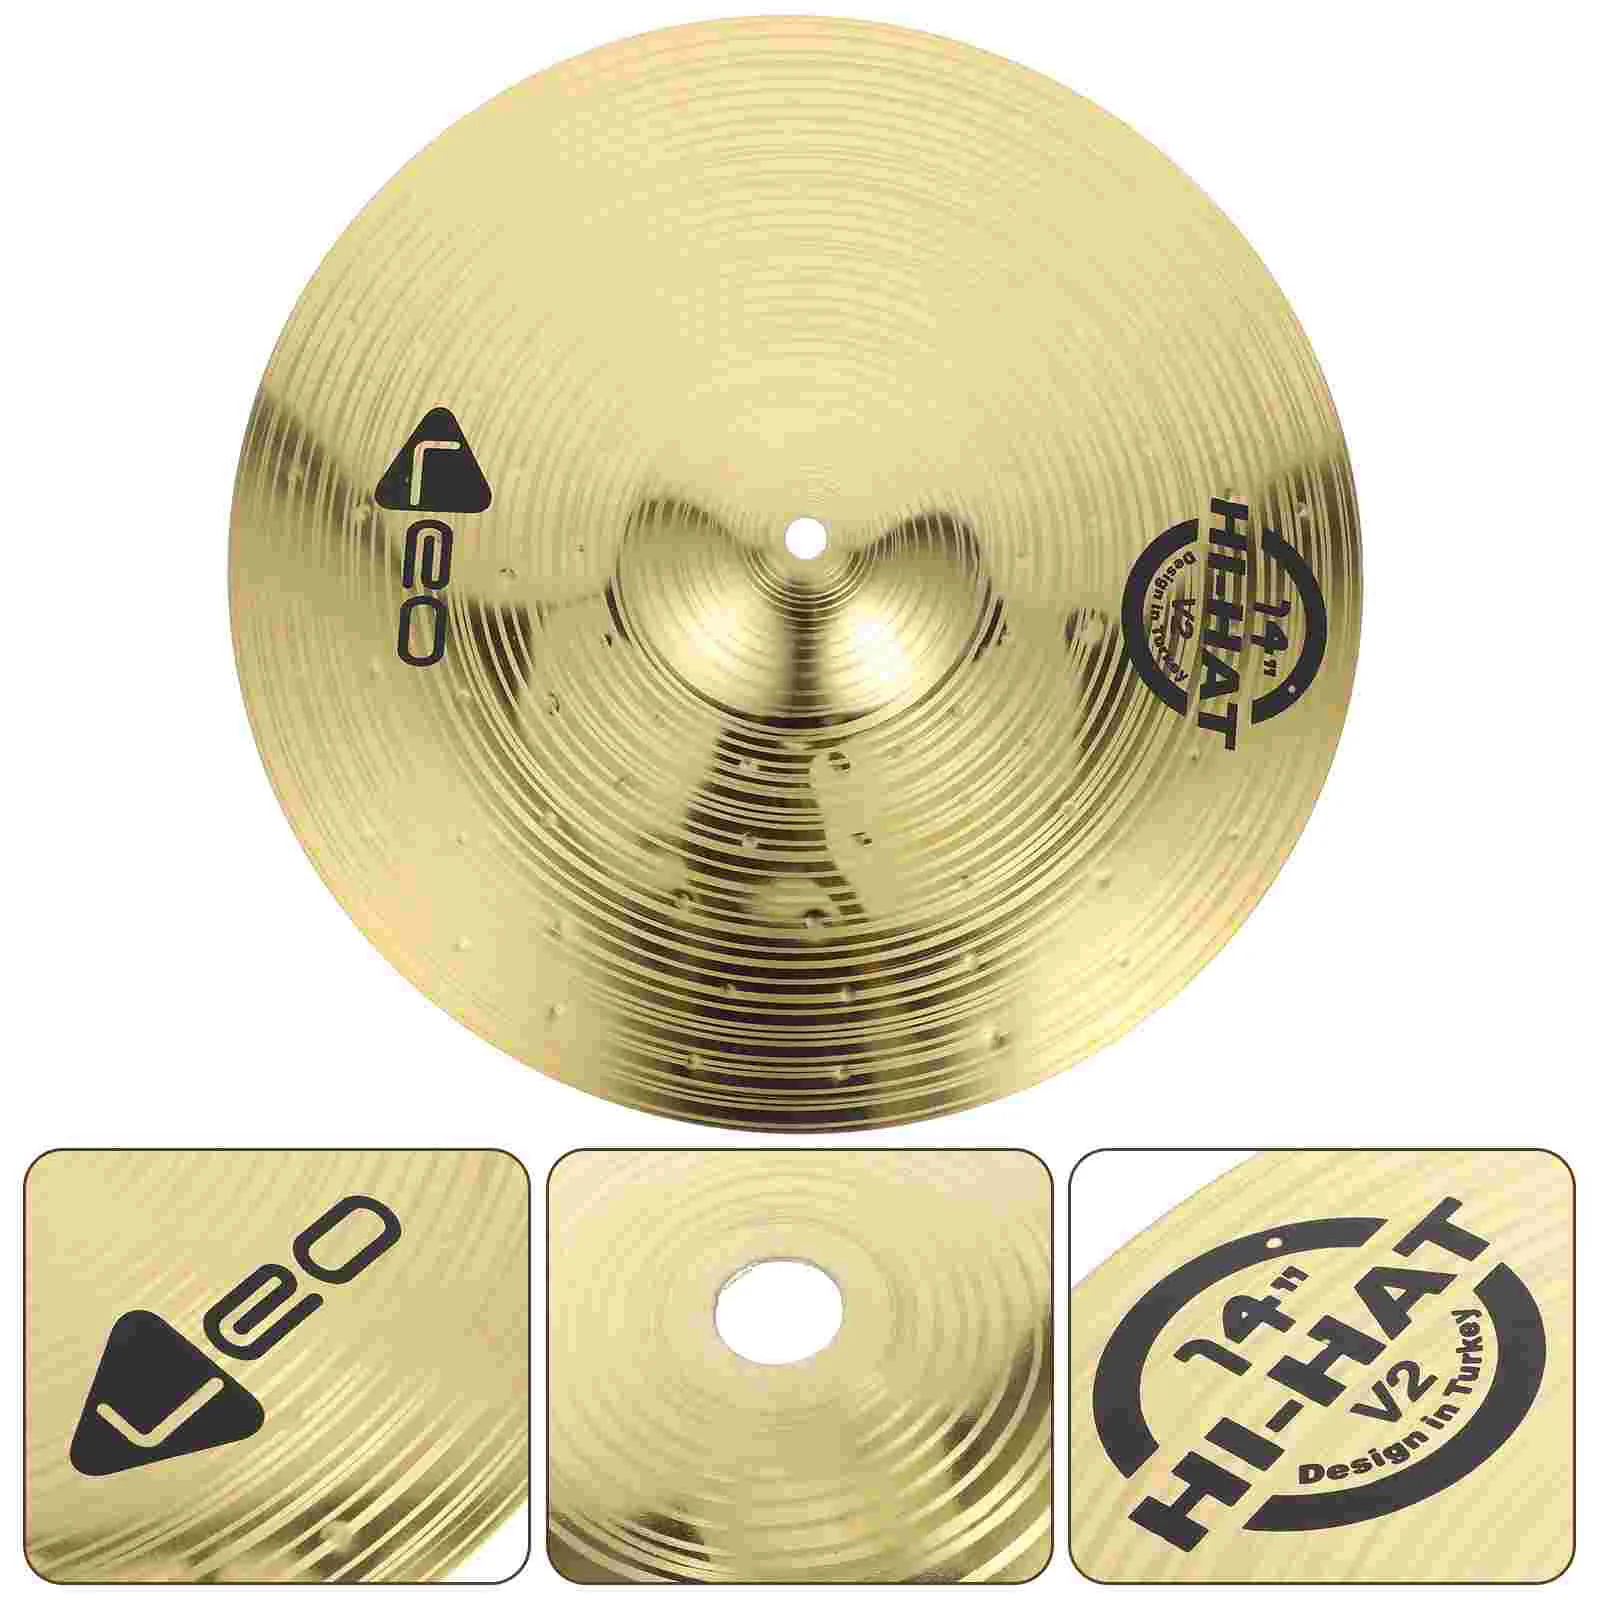 

Crash Cymbal Drum Musical Instrument Accessories Brass Percussion Cymbals Prop for Drum Players 14/16 Inch Size Optional Drum